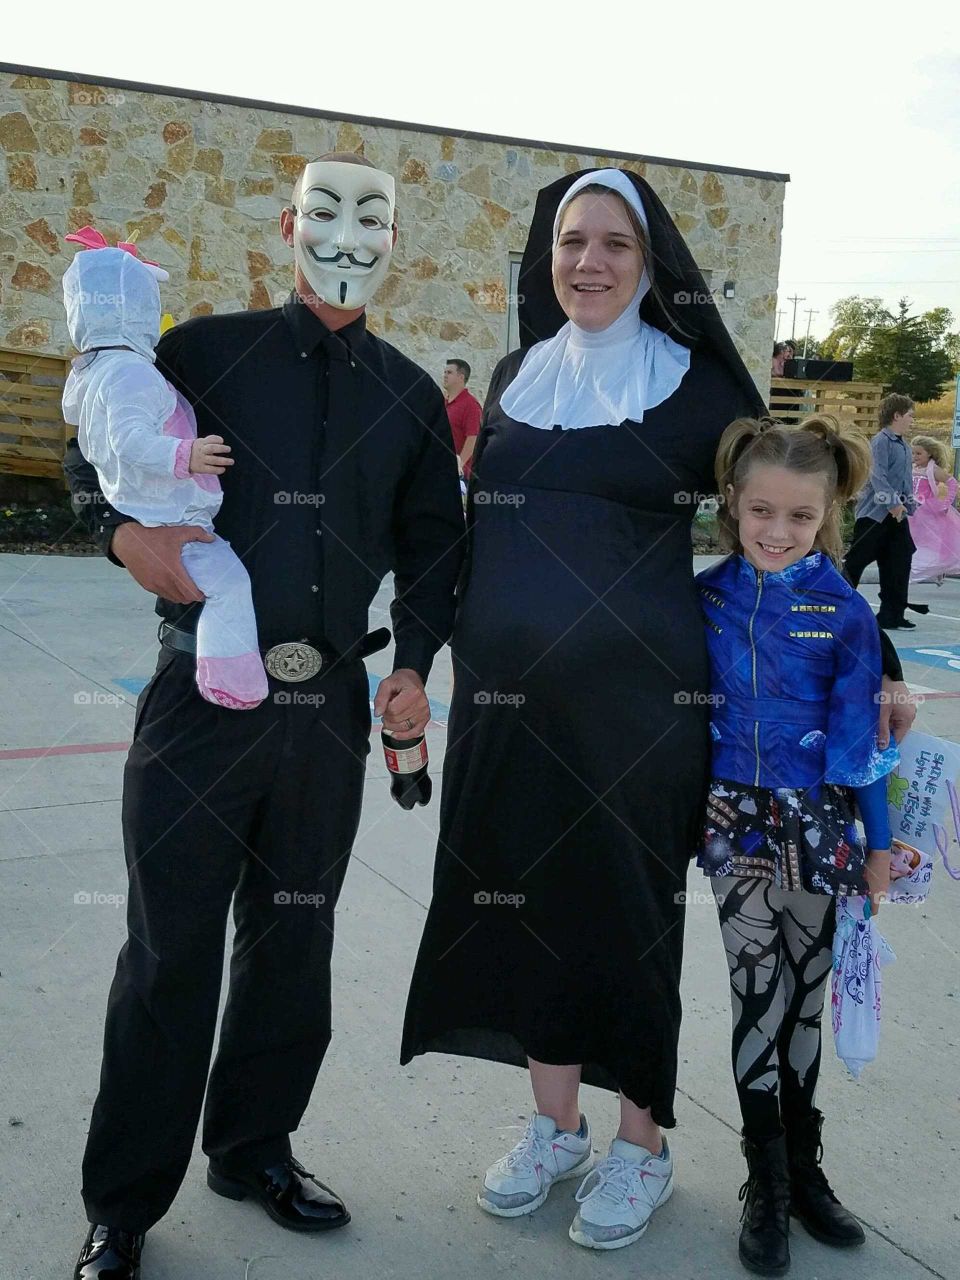 Happy Halloween at Church with Family